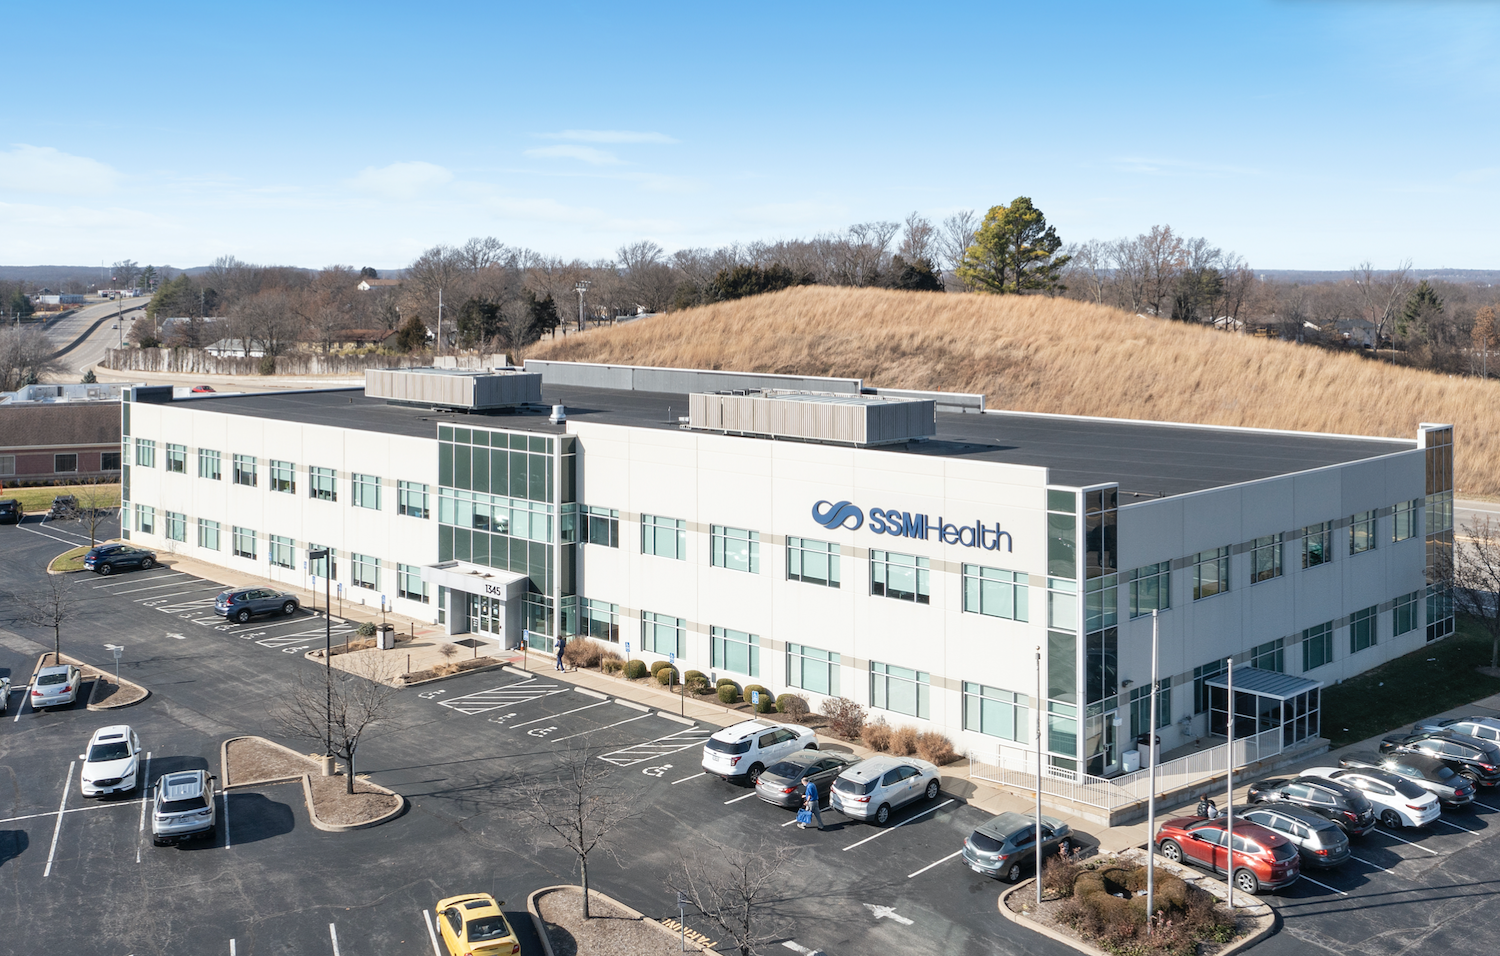 Syndicated Equities Buys Missouri Medical Office for DST Offering